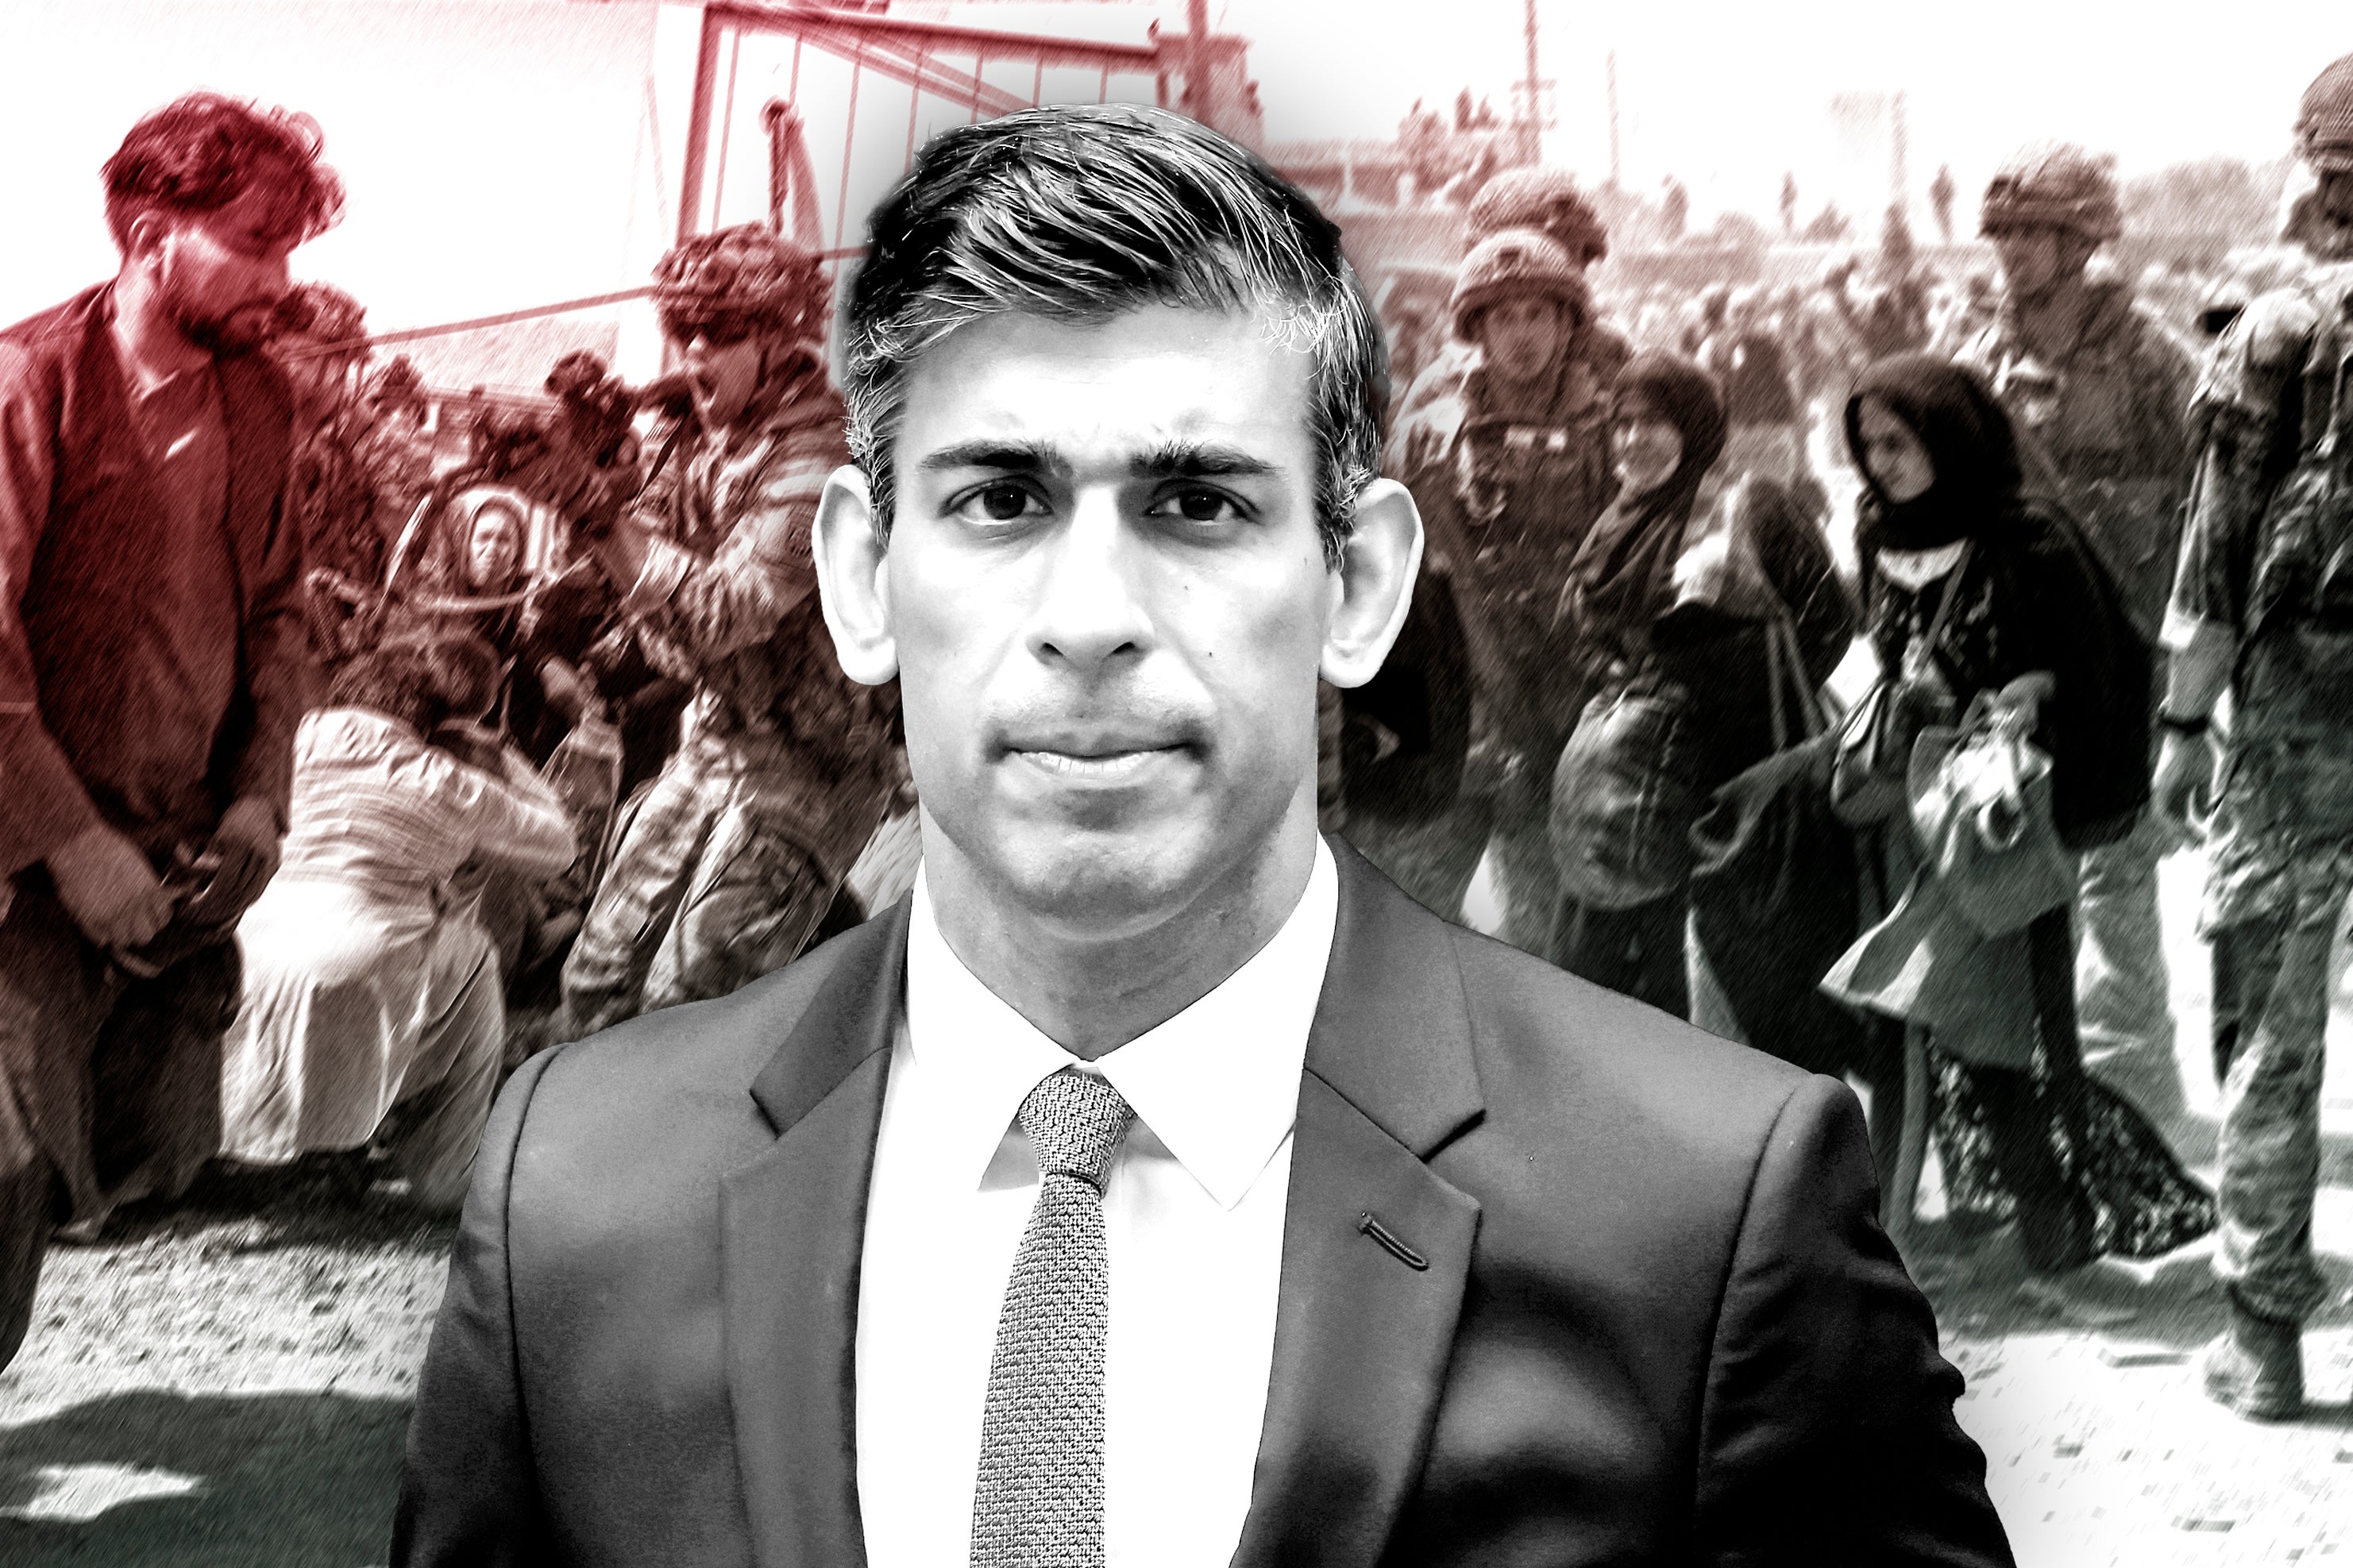 Rishi Sunak’s government dragged its heels on the pilot’s case prompting outrage from military chiefs and politicans across the political divide